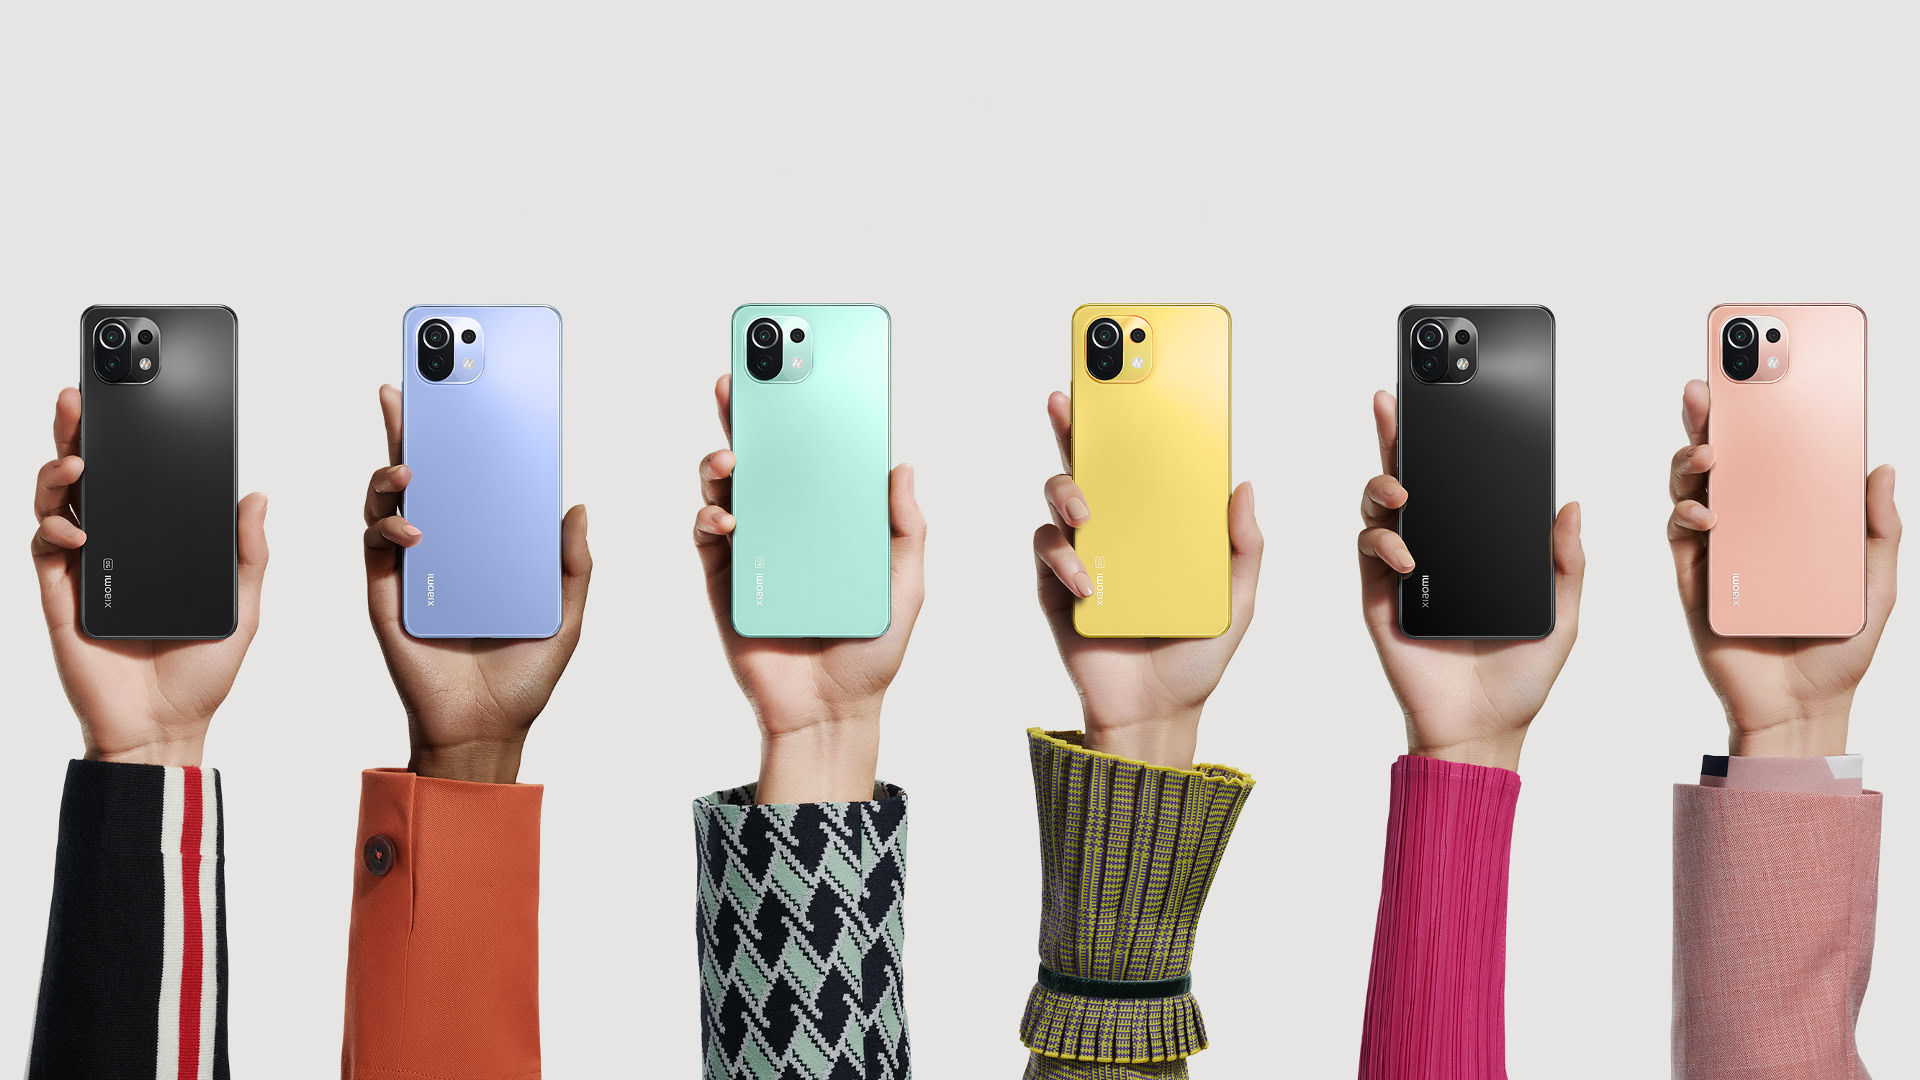 Mi 11 Lite 4G and 5G shot showing the phone in six different colors in the hand.